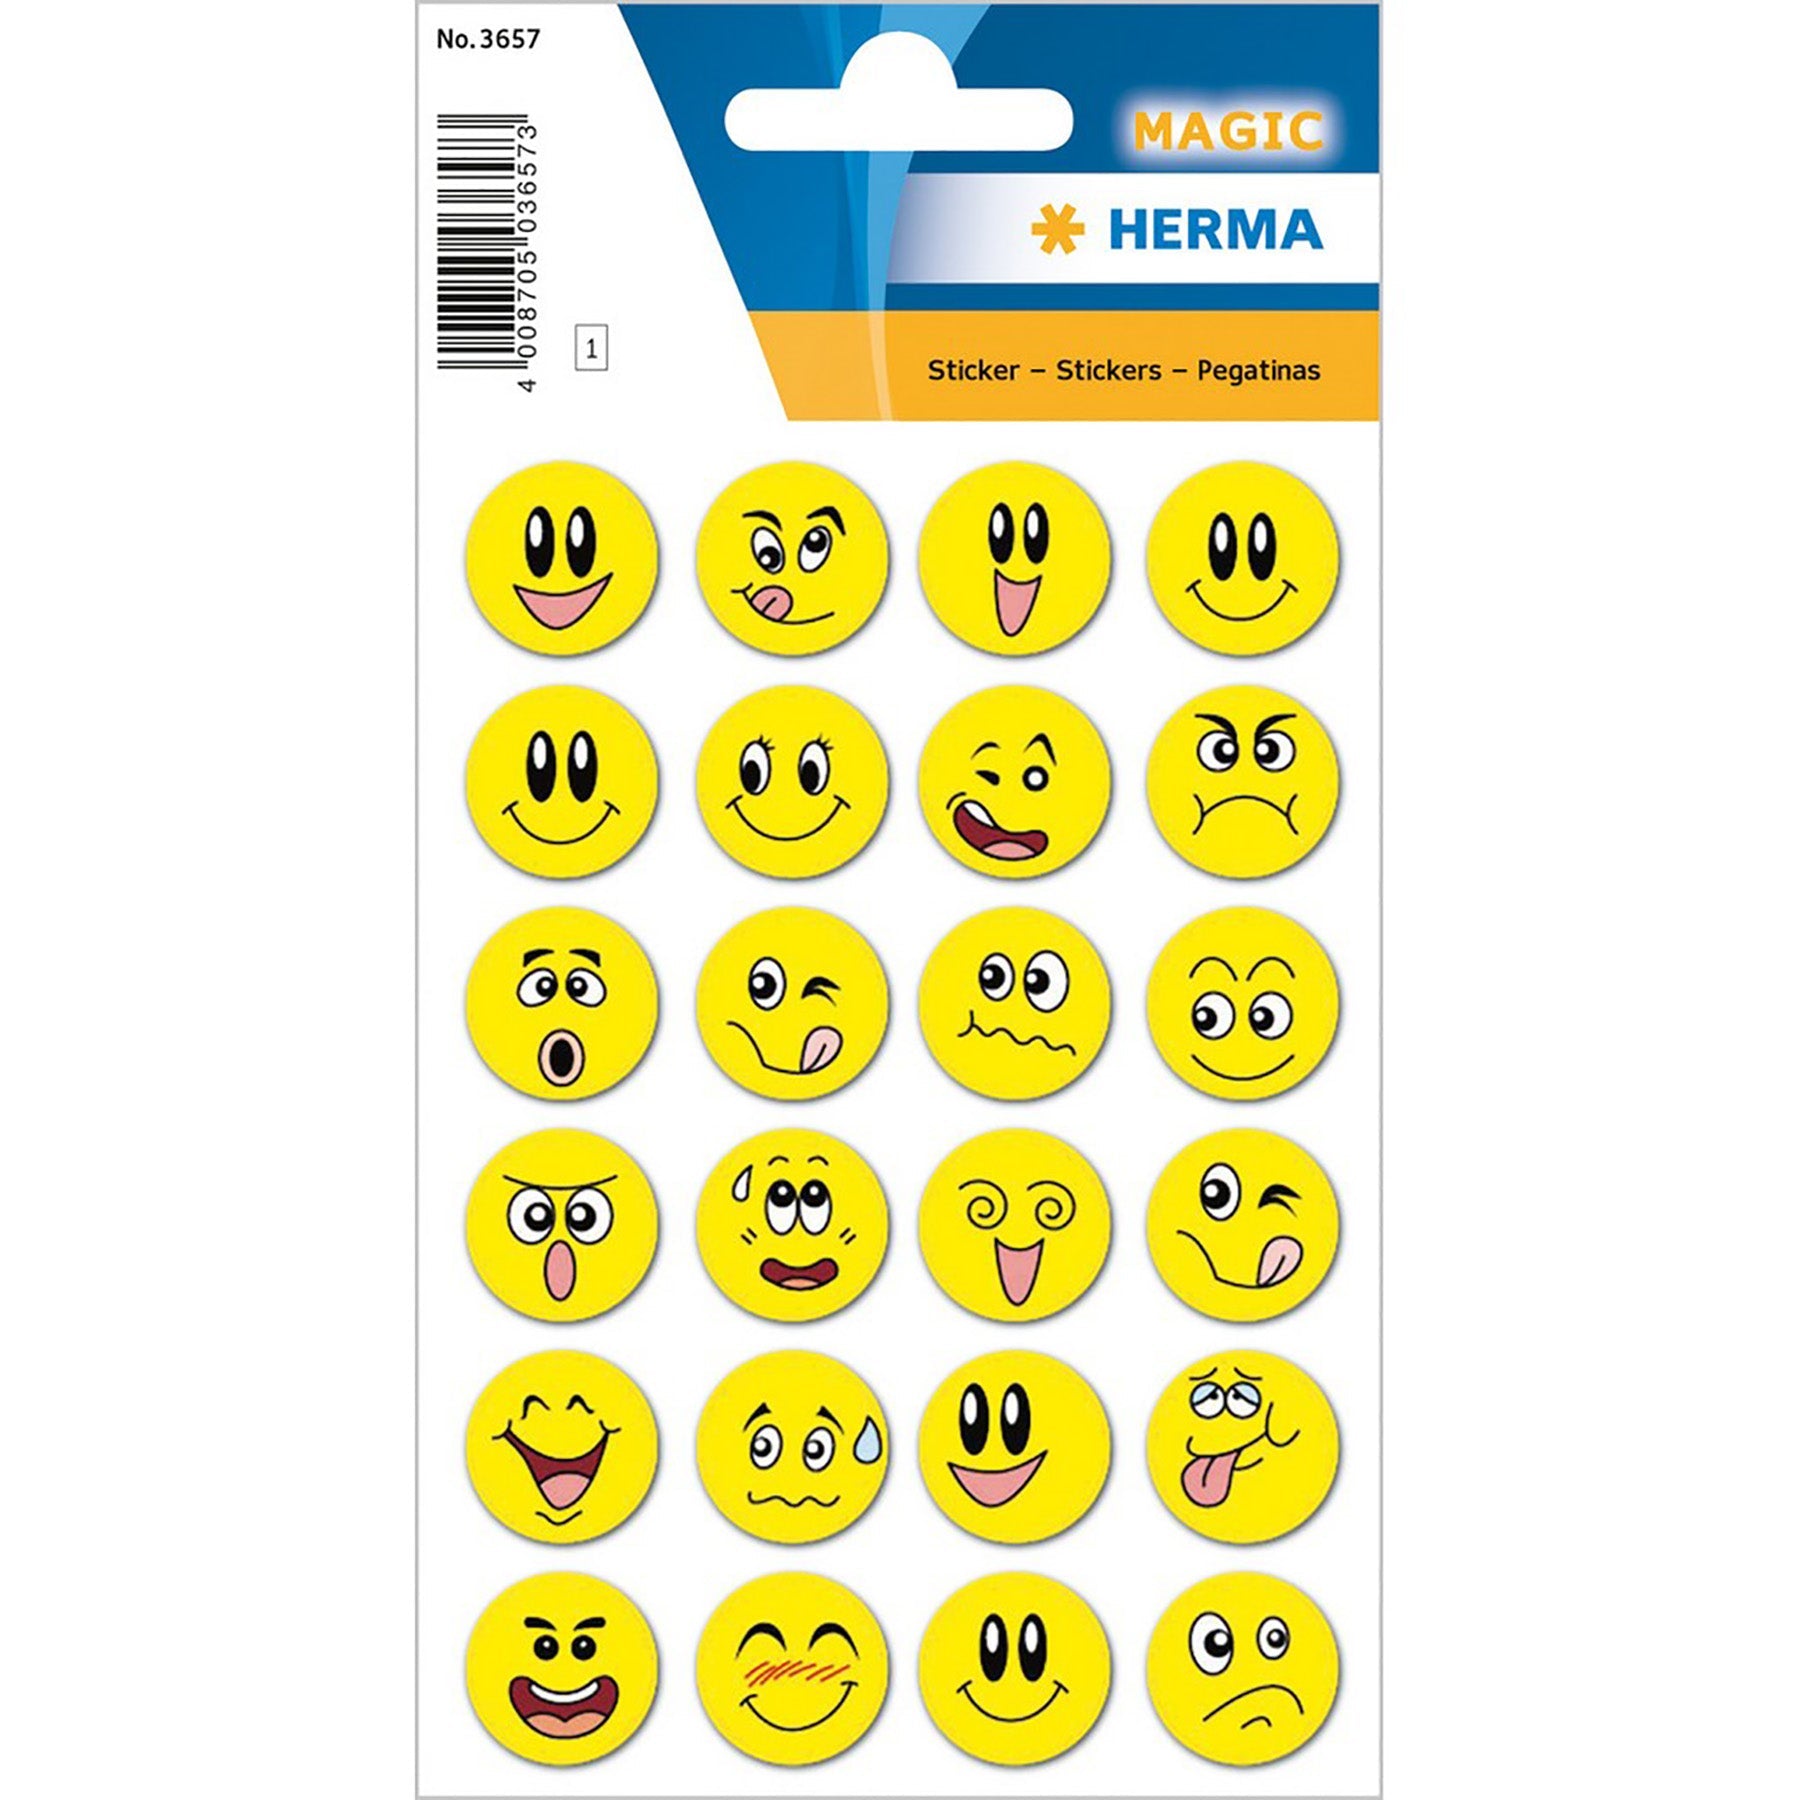 Herma Magic Stickers Funny Faces Motion 0.47x1.33in each